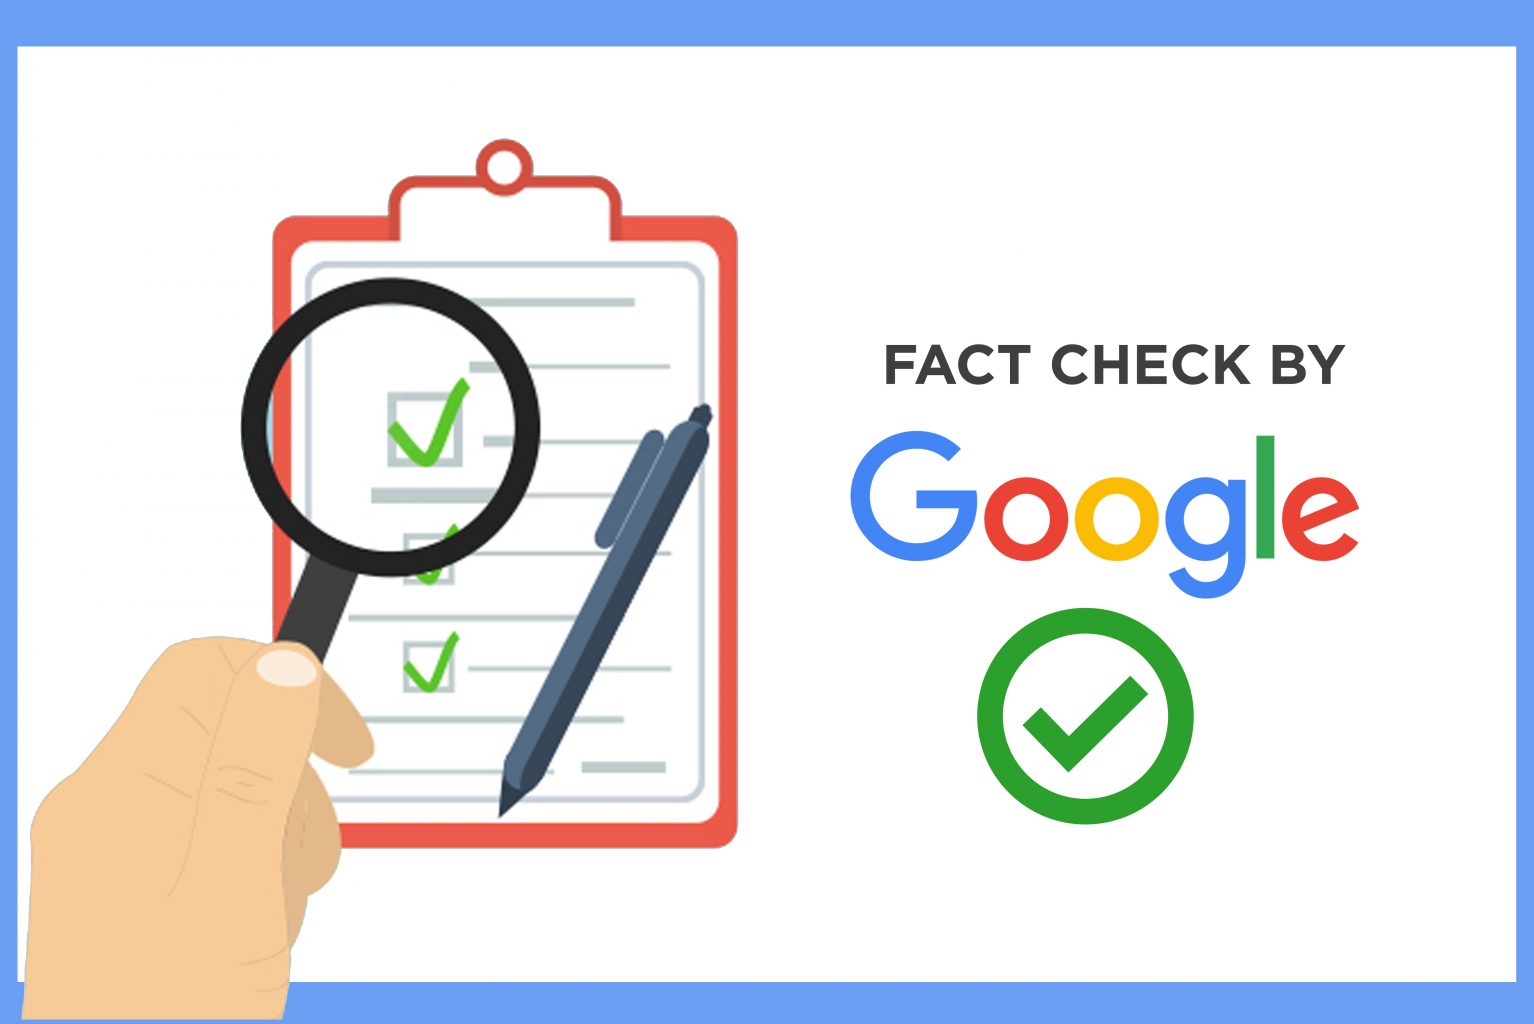 Google Updates 2019 - Google Fact Checkers for SEO - Latest Google Algorithm Changes - iQuanti Digital Marketing Agency